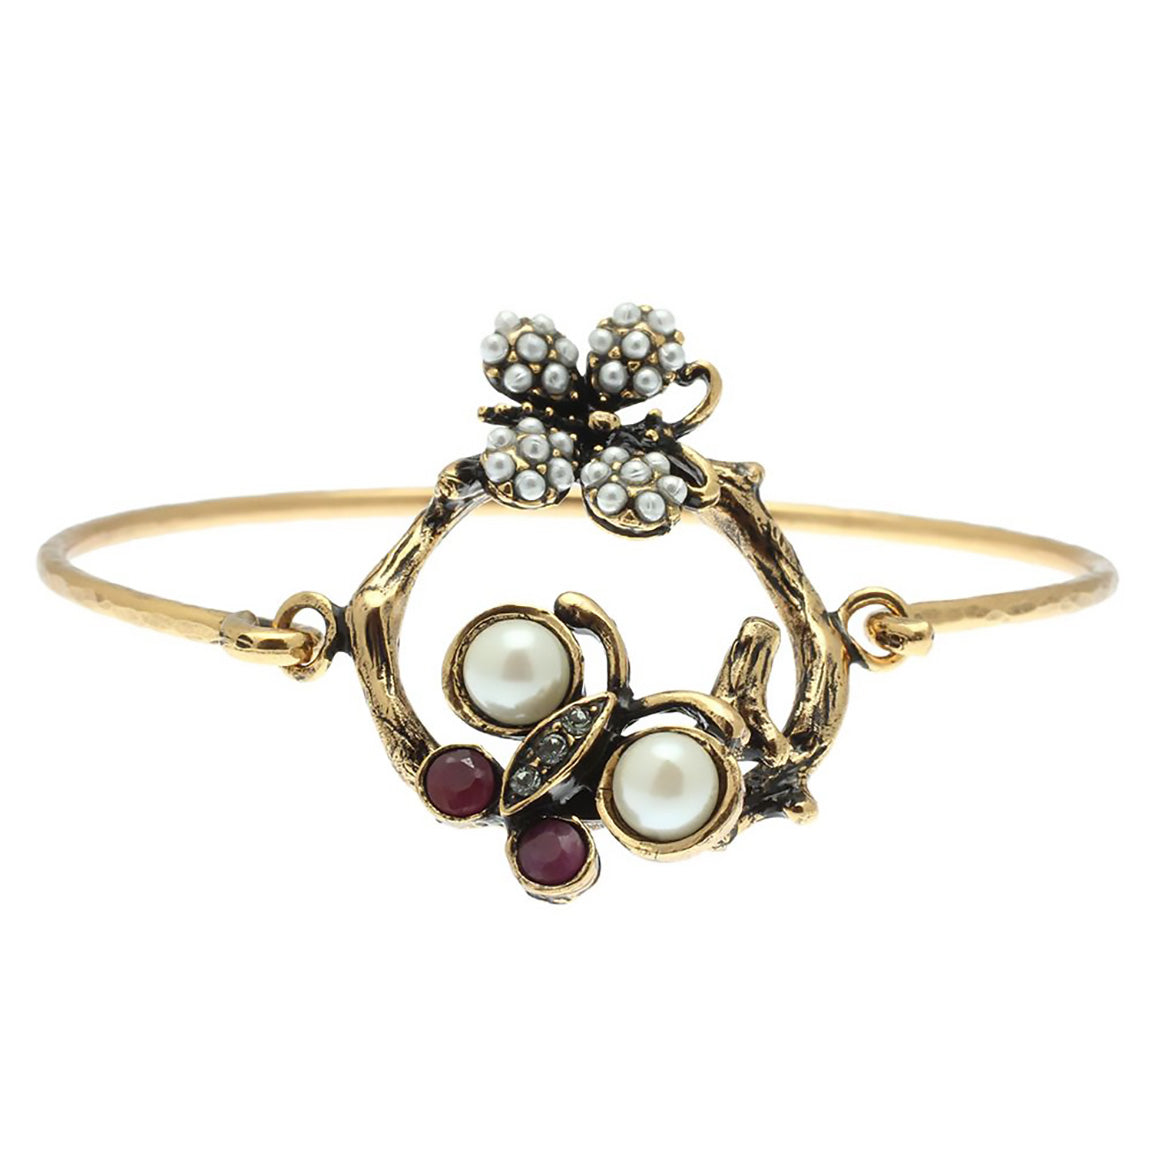 Gold butterfly bracelet with pearls and garnets